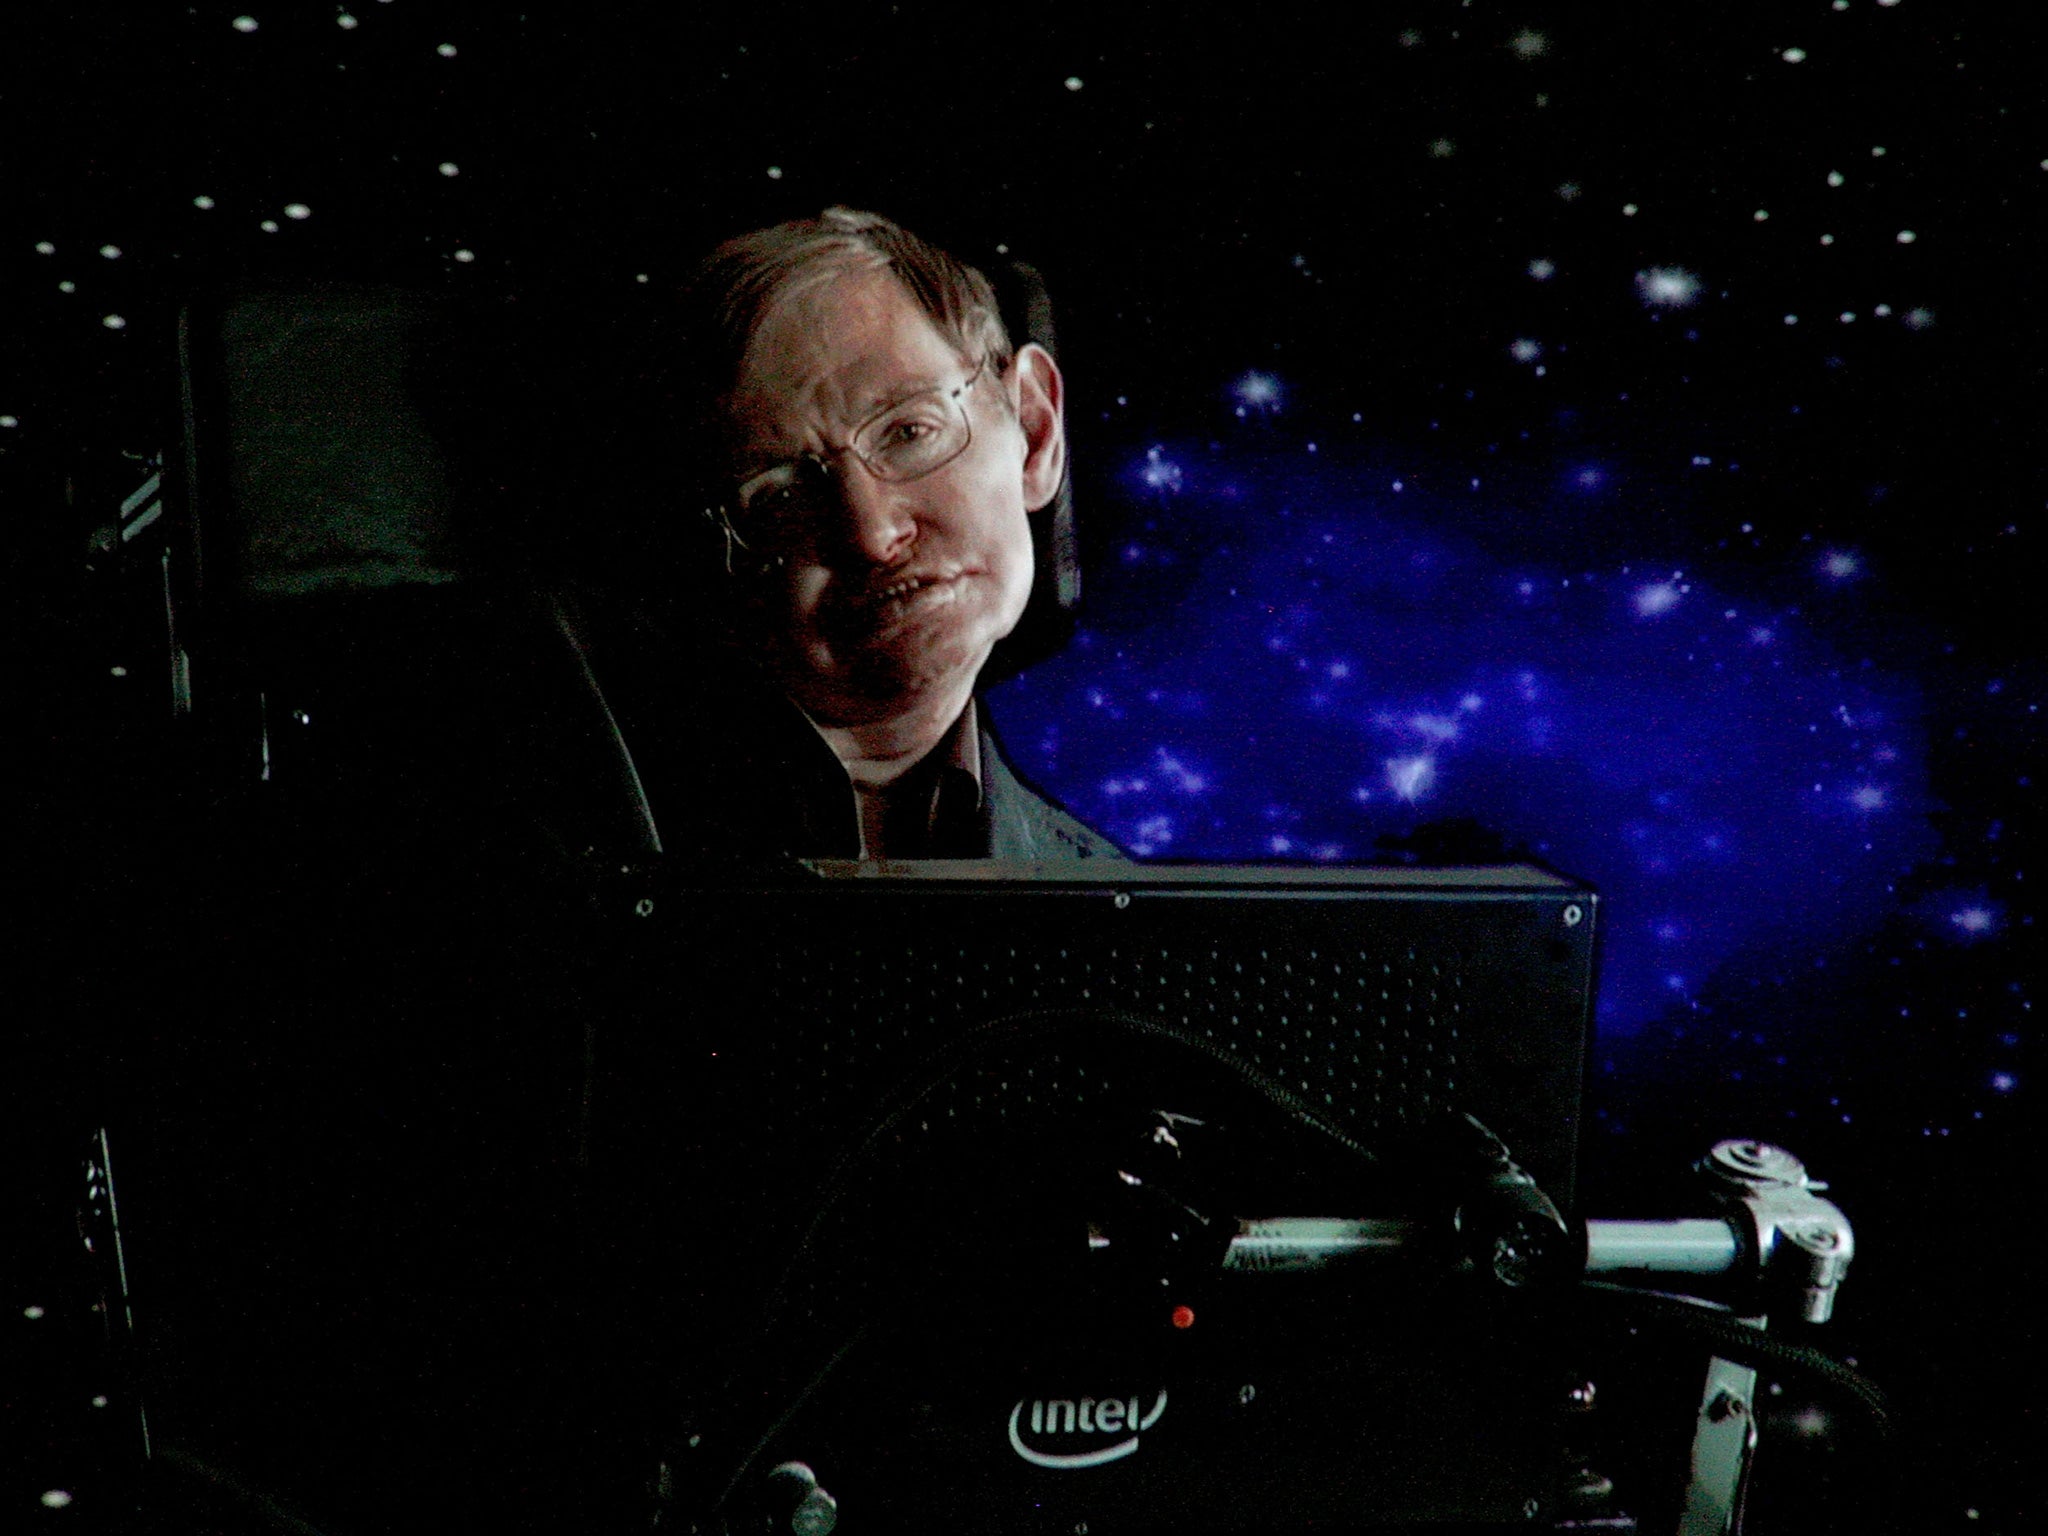 Professor Hawking said that there was 'no bigger question' in science than whether human beings are alone